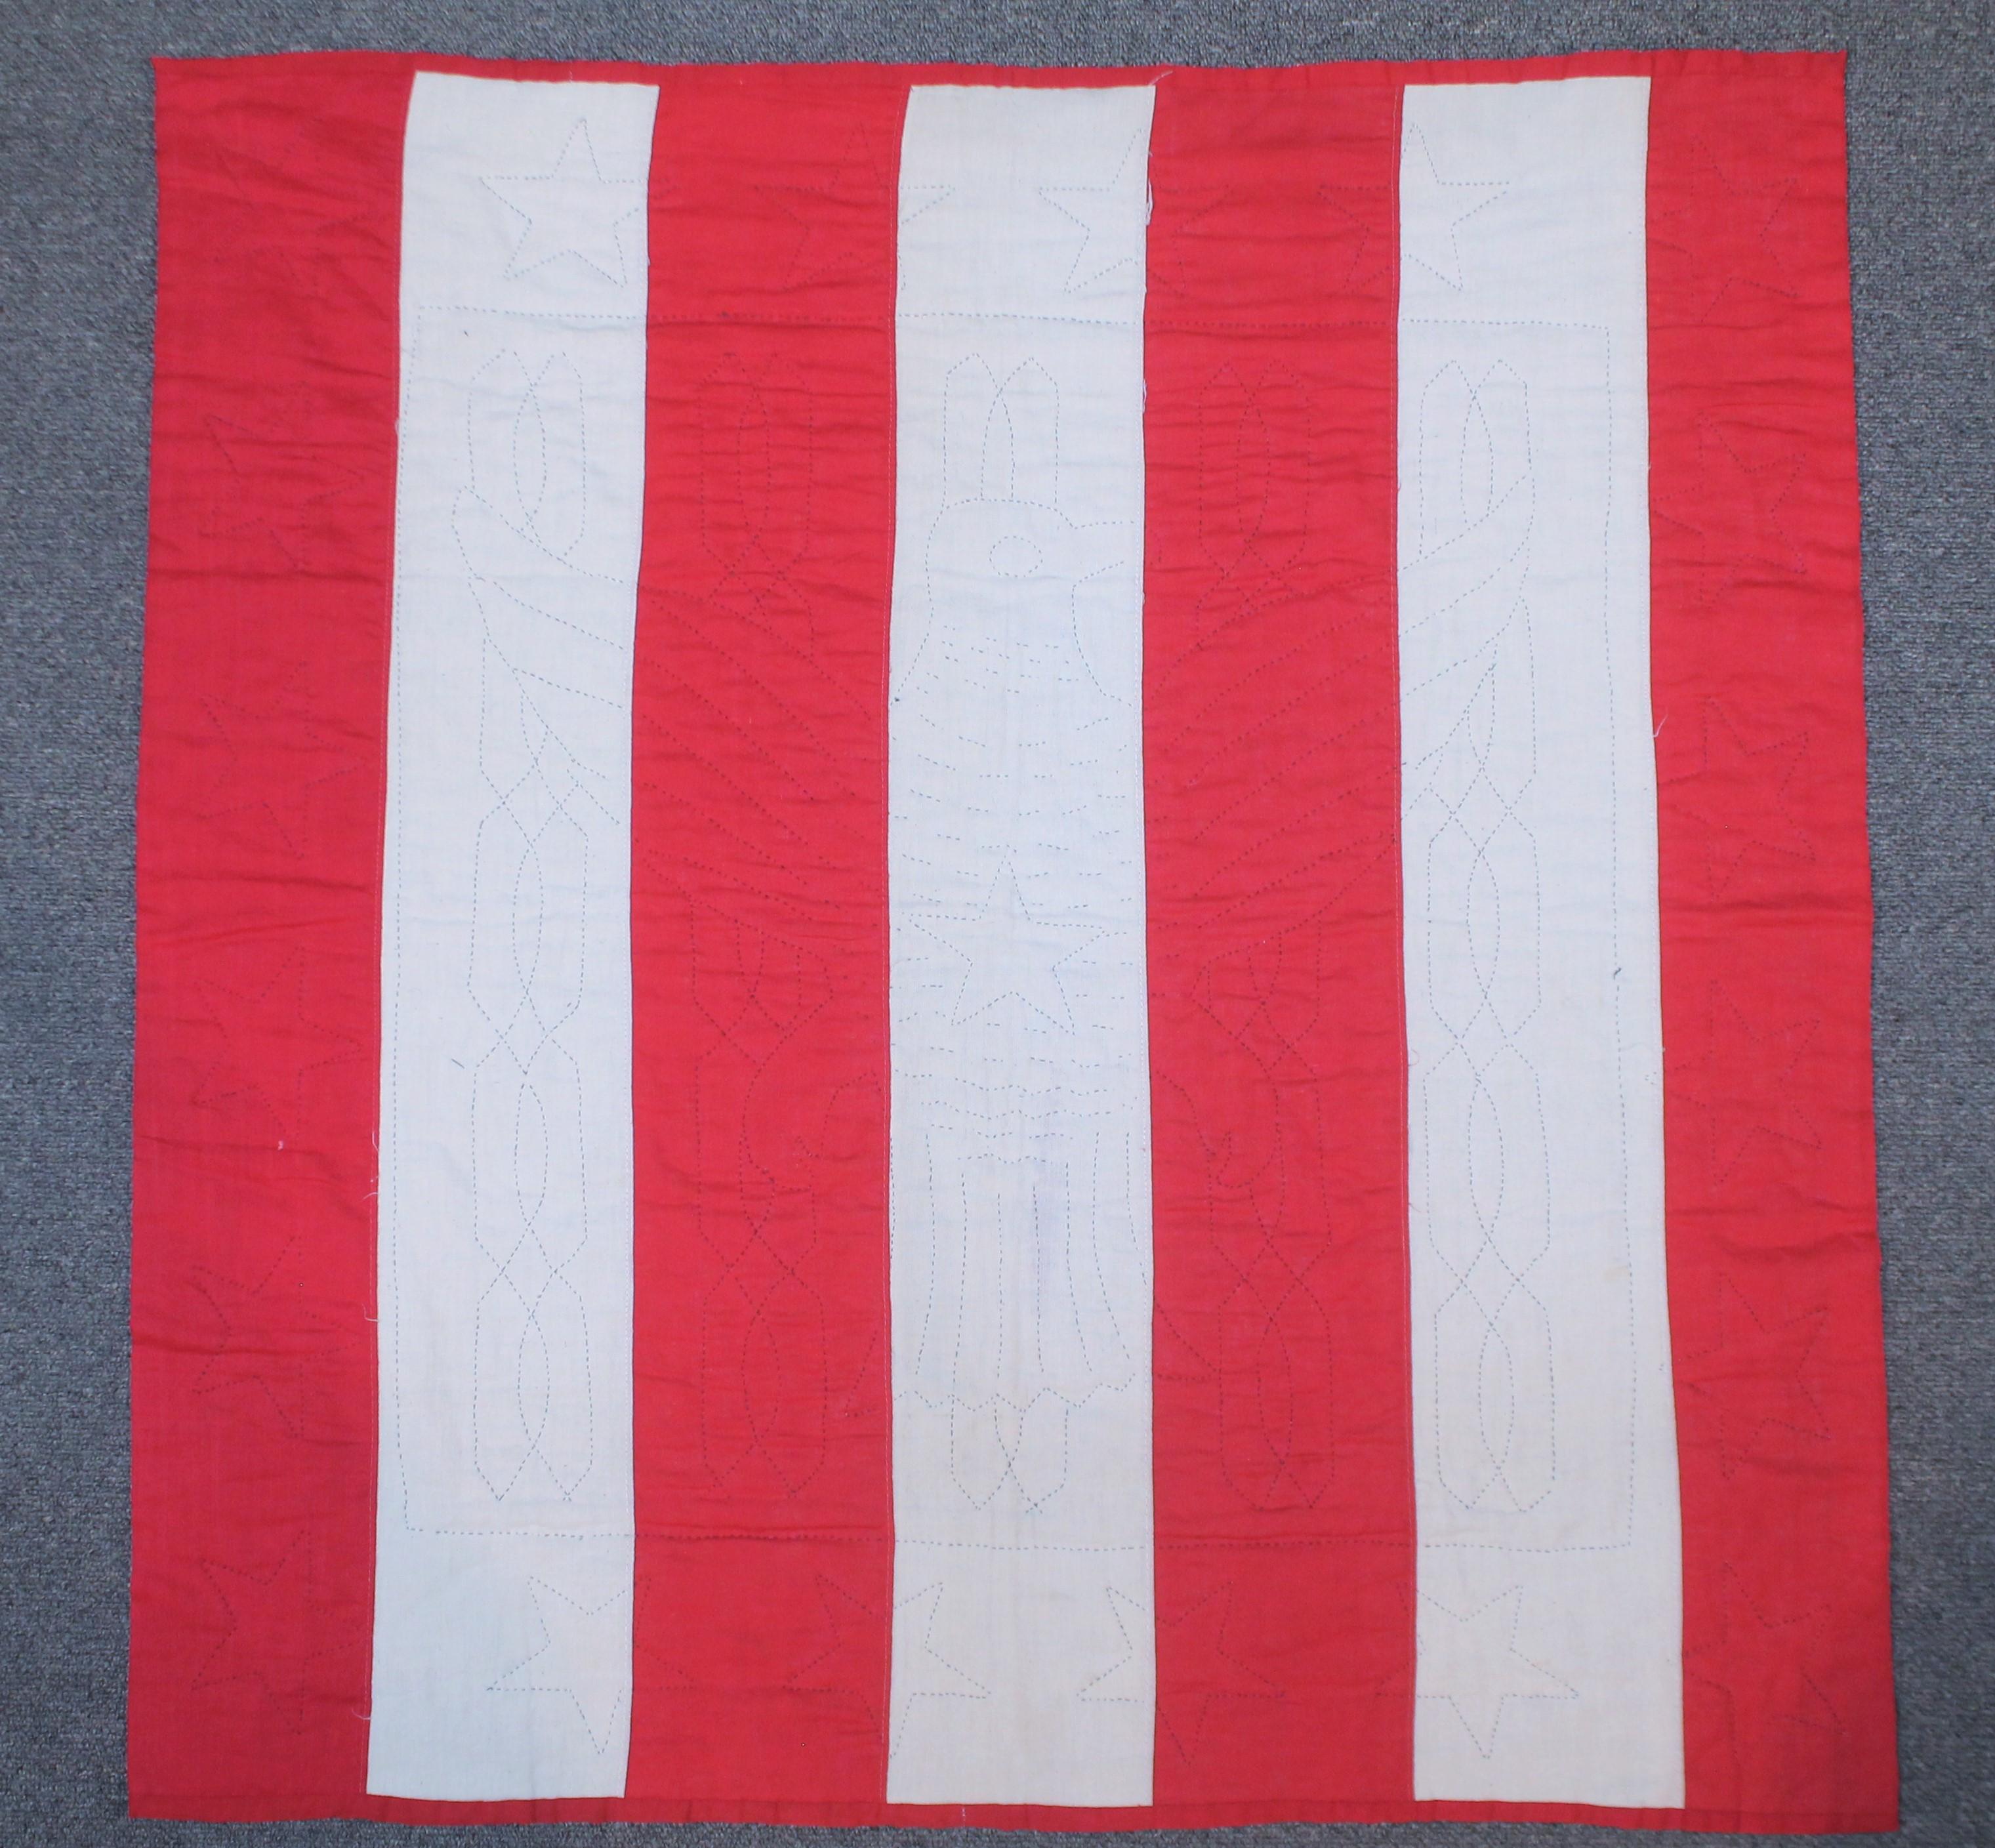 This great patriotic quilt is made from 19th century flag fabric. We believe this to be made in the earlier part of the 20th century. This is a great quilt and in great form. Very rare and amazing condition.